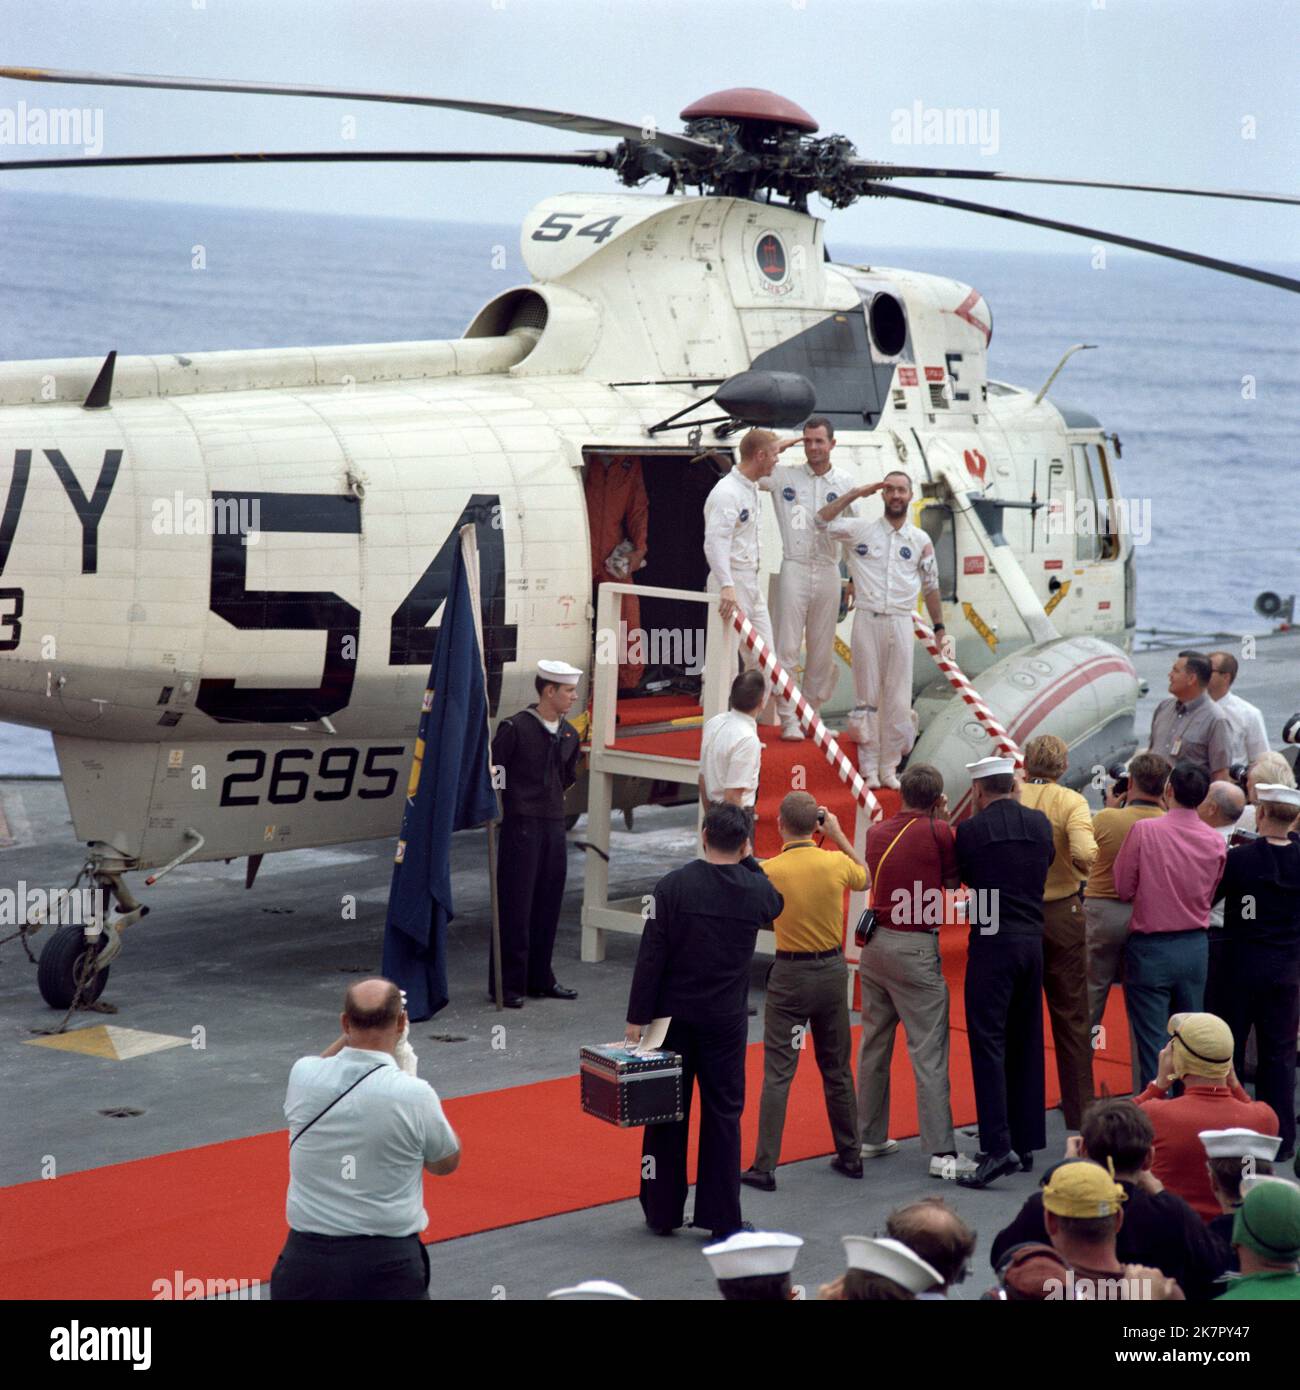 USS Guadalcanal, United States. 18th Oct, 2022. NASA Apollo 9 astronauts, left to right, Russell Schweickart, David Scott, and James McDivitt salute as they arrive aboard the USS Guadalcanal following Splashdown in the Atlantic Ocean, March 13, 1969 off the coast of Florida. McDivitt commanded the first Gemini spacewalk mission and commanded Apollo 9 during the first crewed orbital flight of a the lunar module, died October 15, 2022 at age 93. Credit: NASA/NASA/Alamy Live News Stock Photo